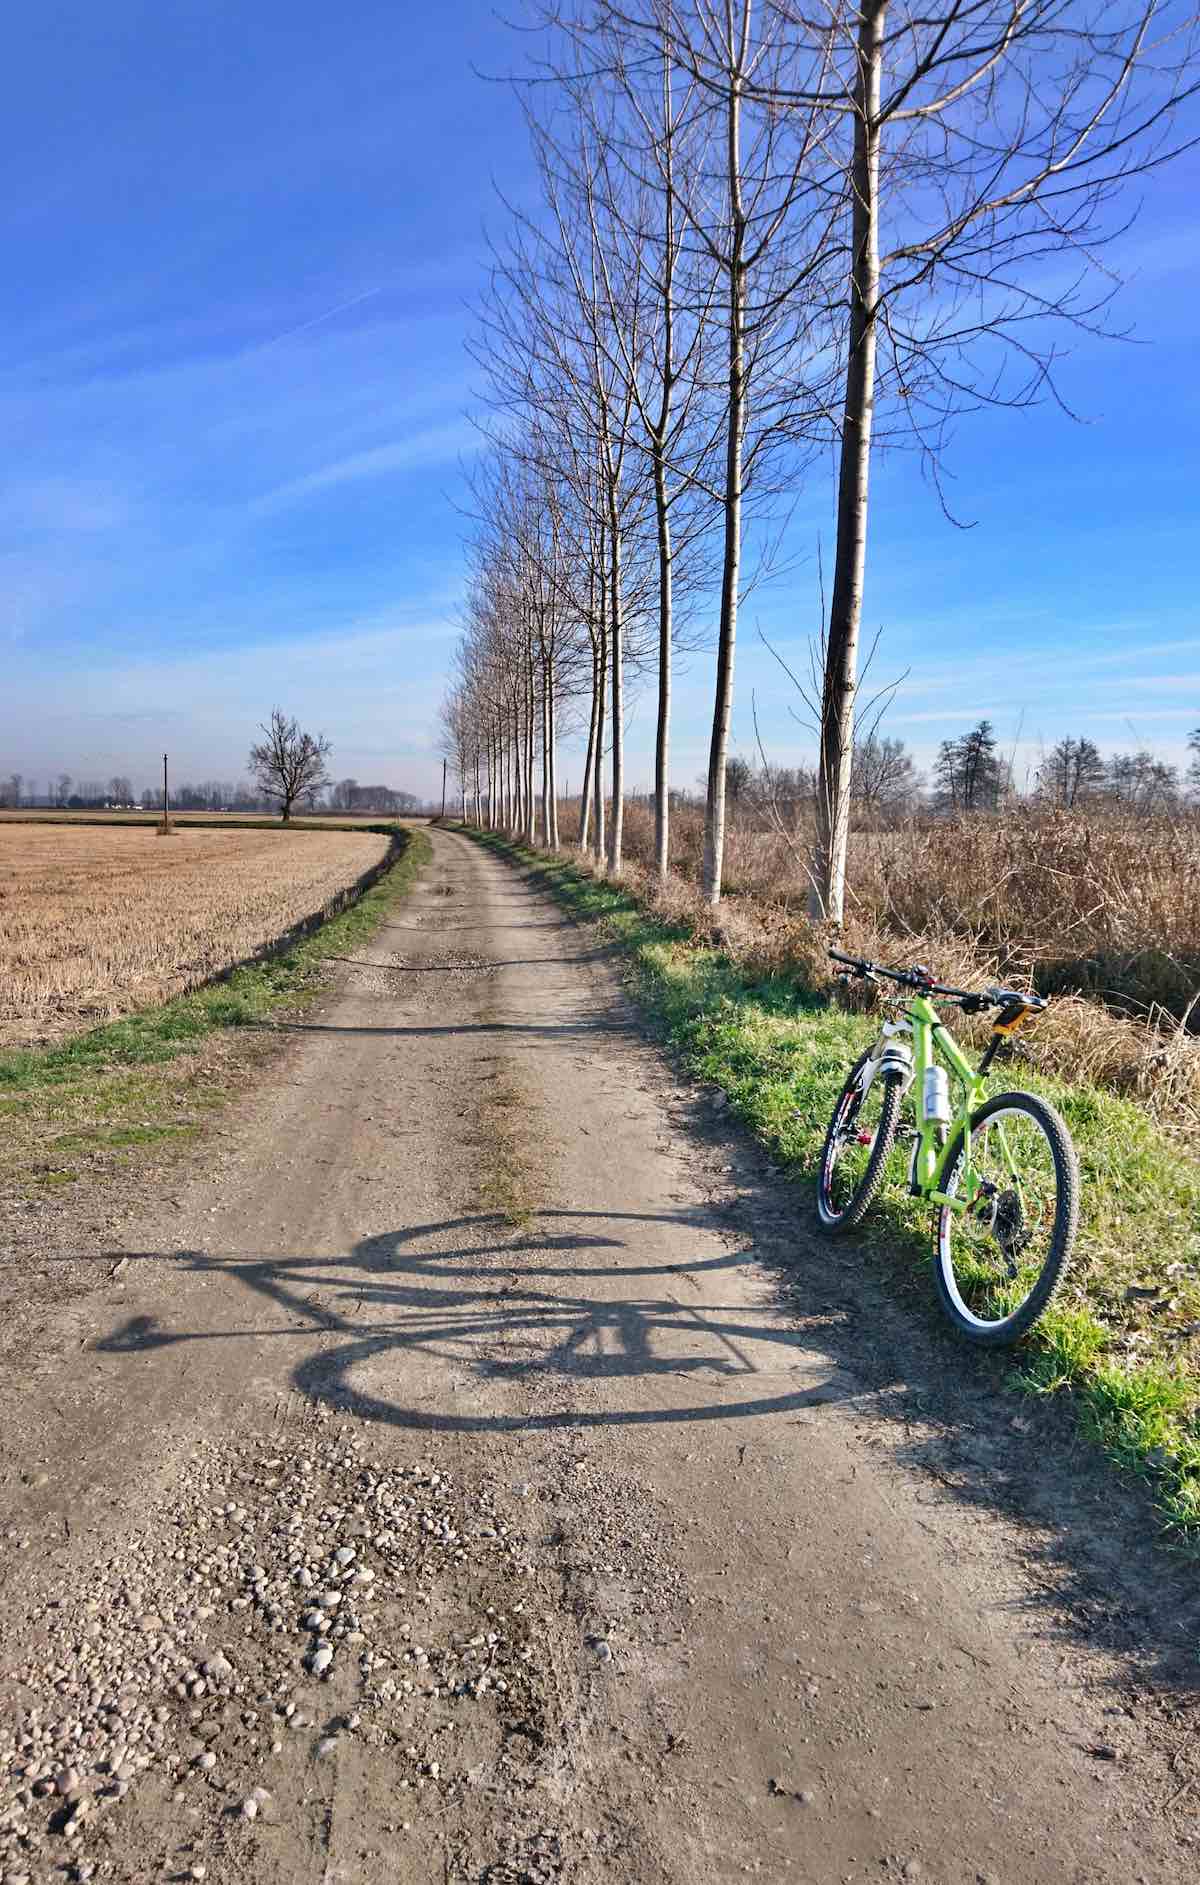 bikerumor pic of the day bicycle on the side of a flat gravel road with field on the left and straight row of tall trees on the right.